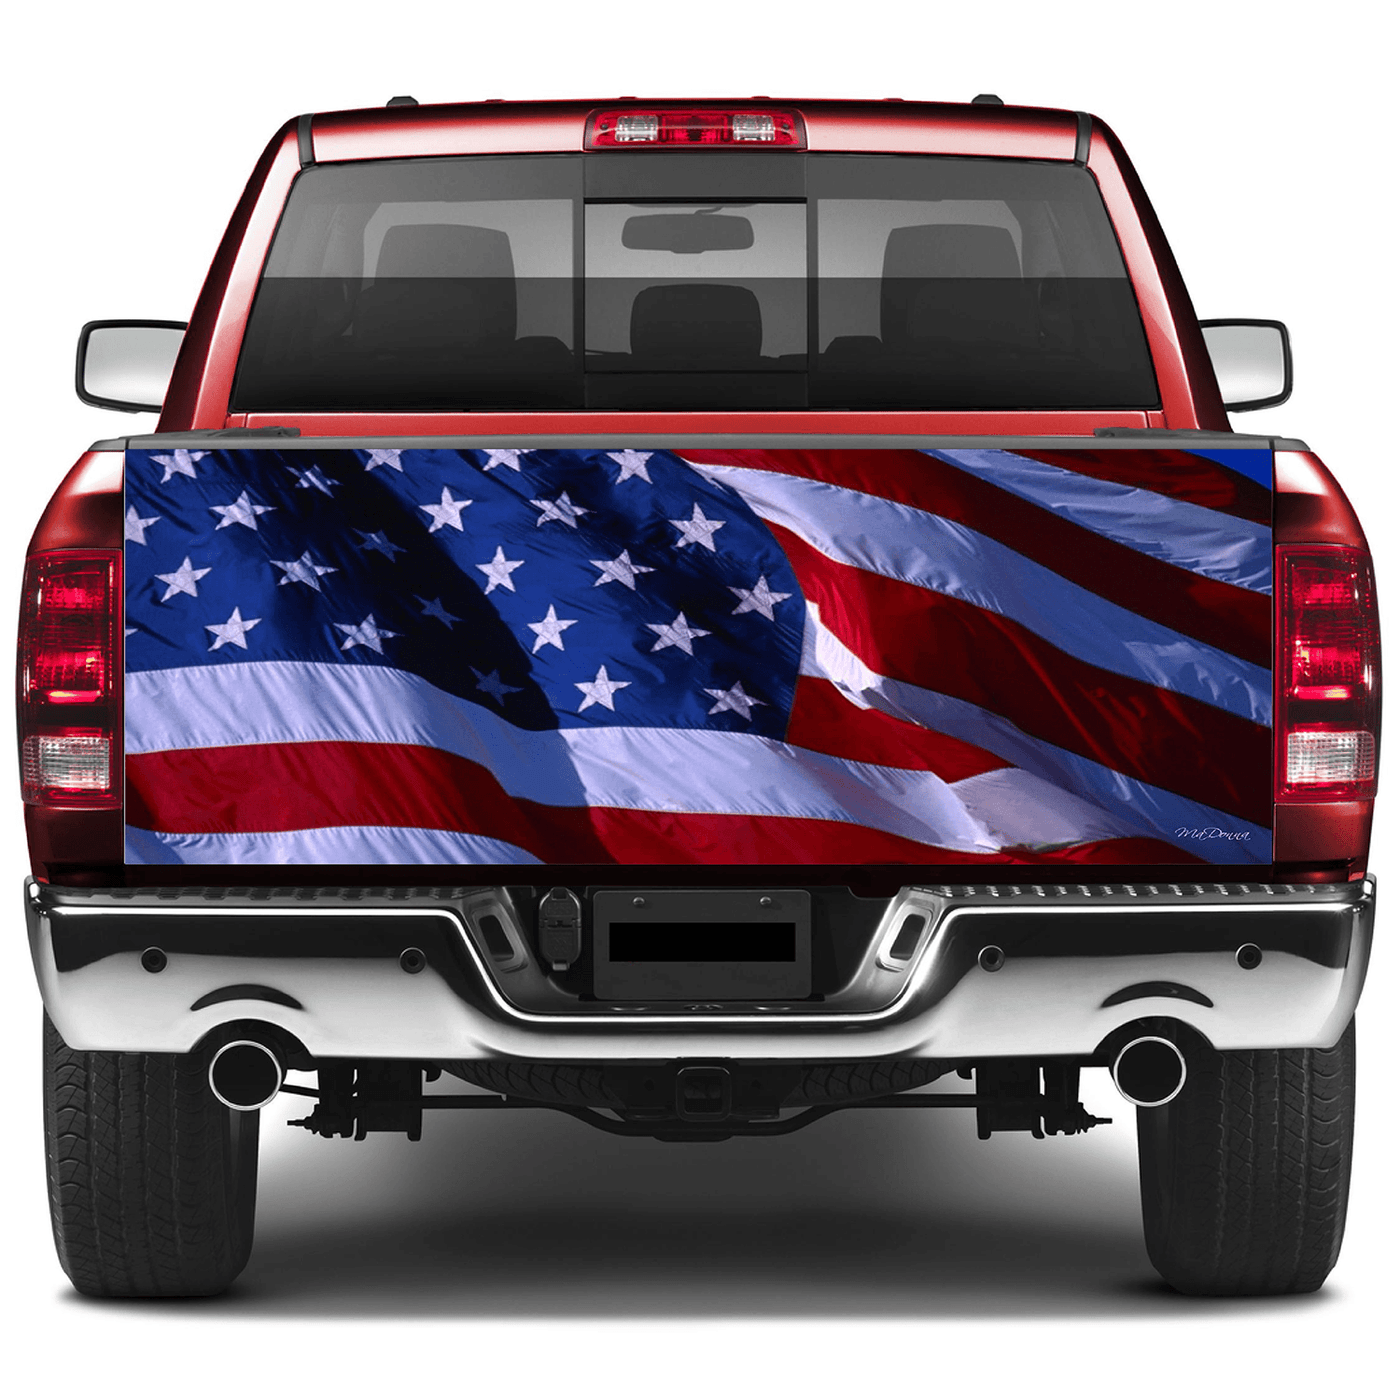 Tailgate Wraps For Trucks Wrap Vinyl Car Decals Flying Proud SUV Car Sticker